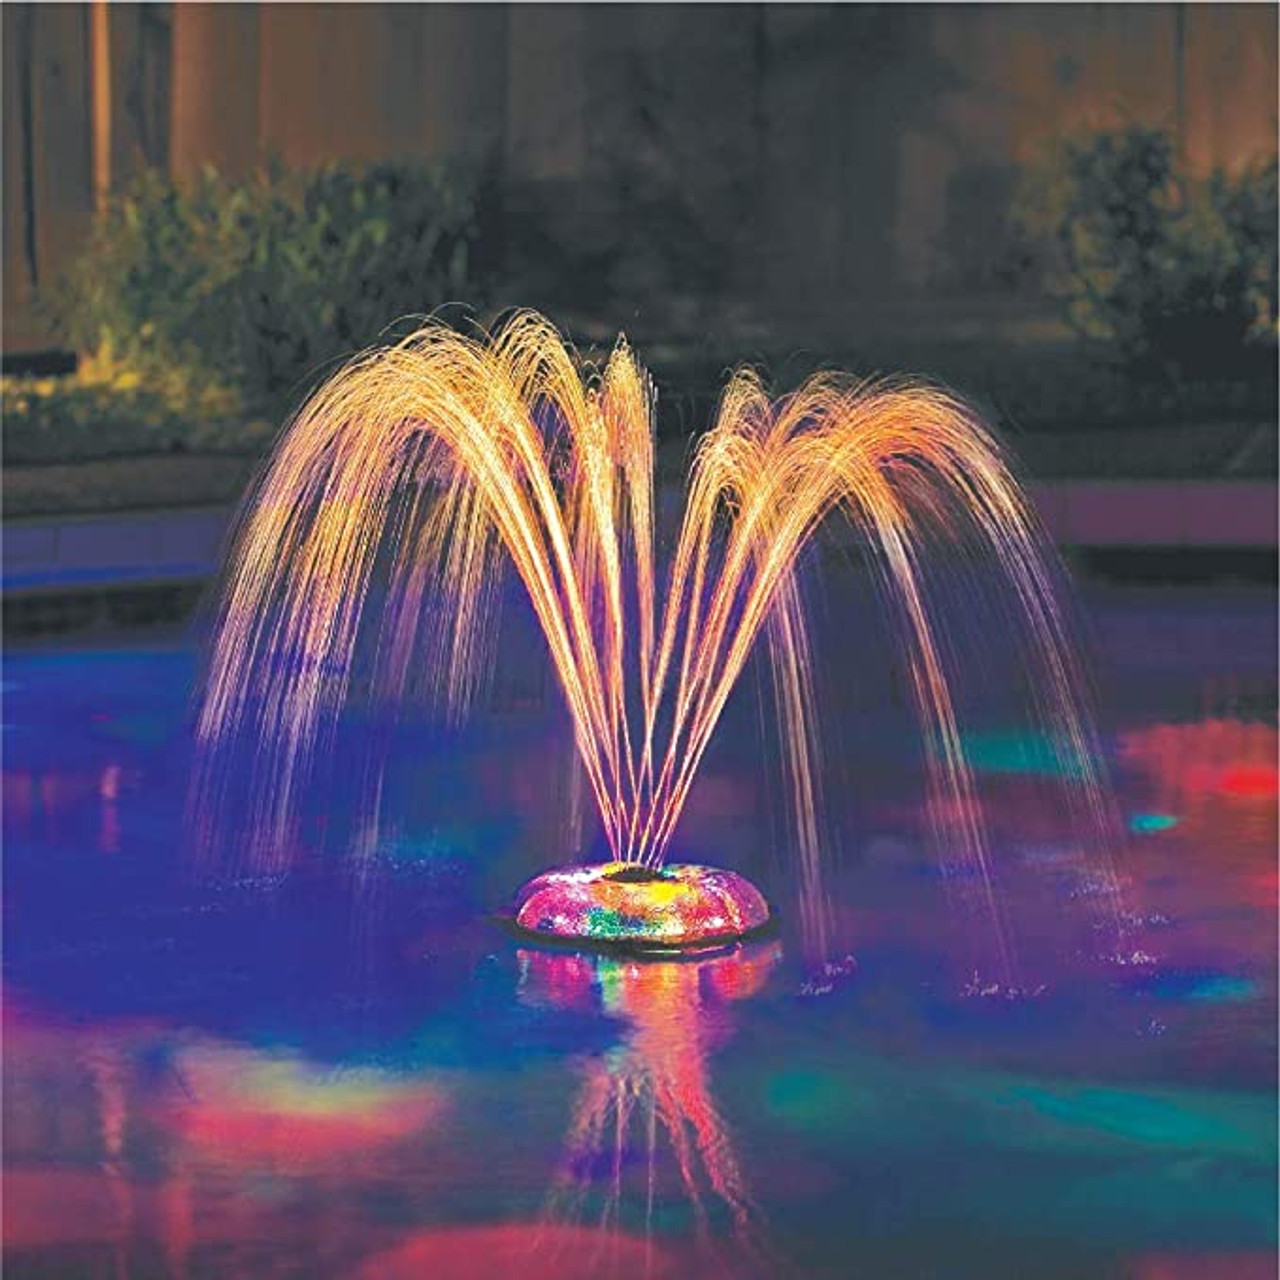 Swimming Pool Lights - Underwater, Inground, Solar and Floating Lights